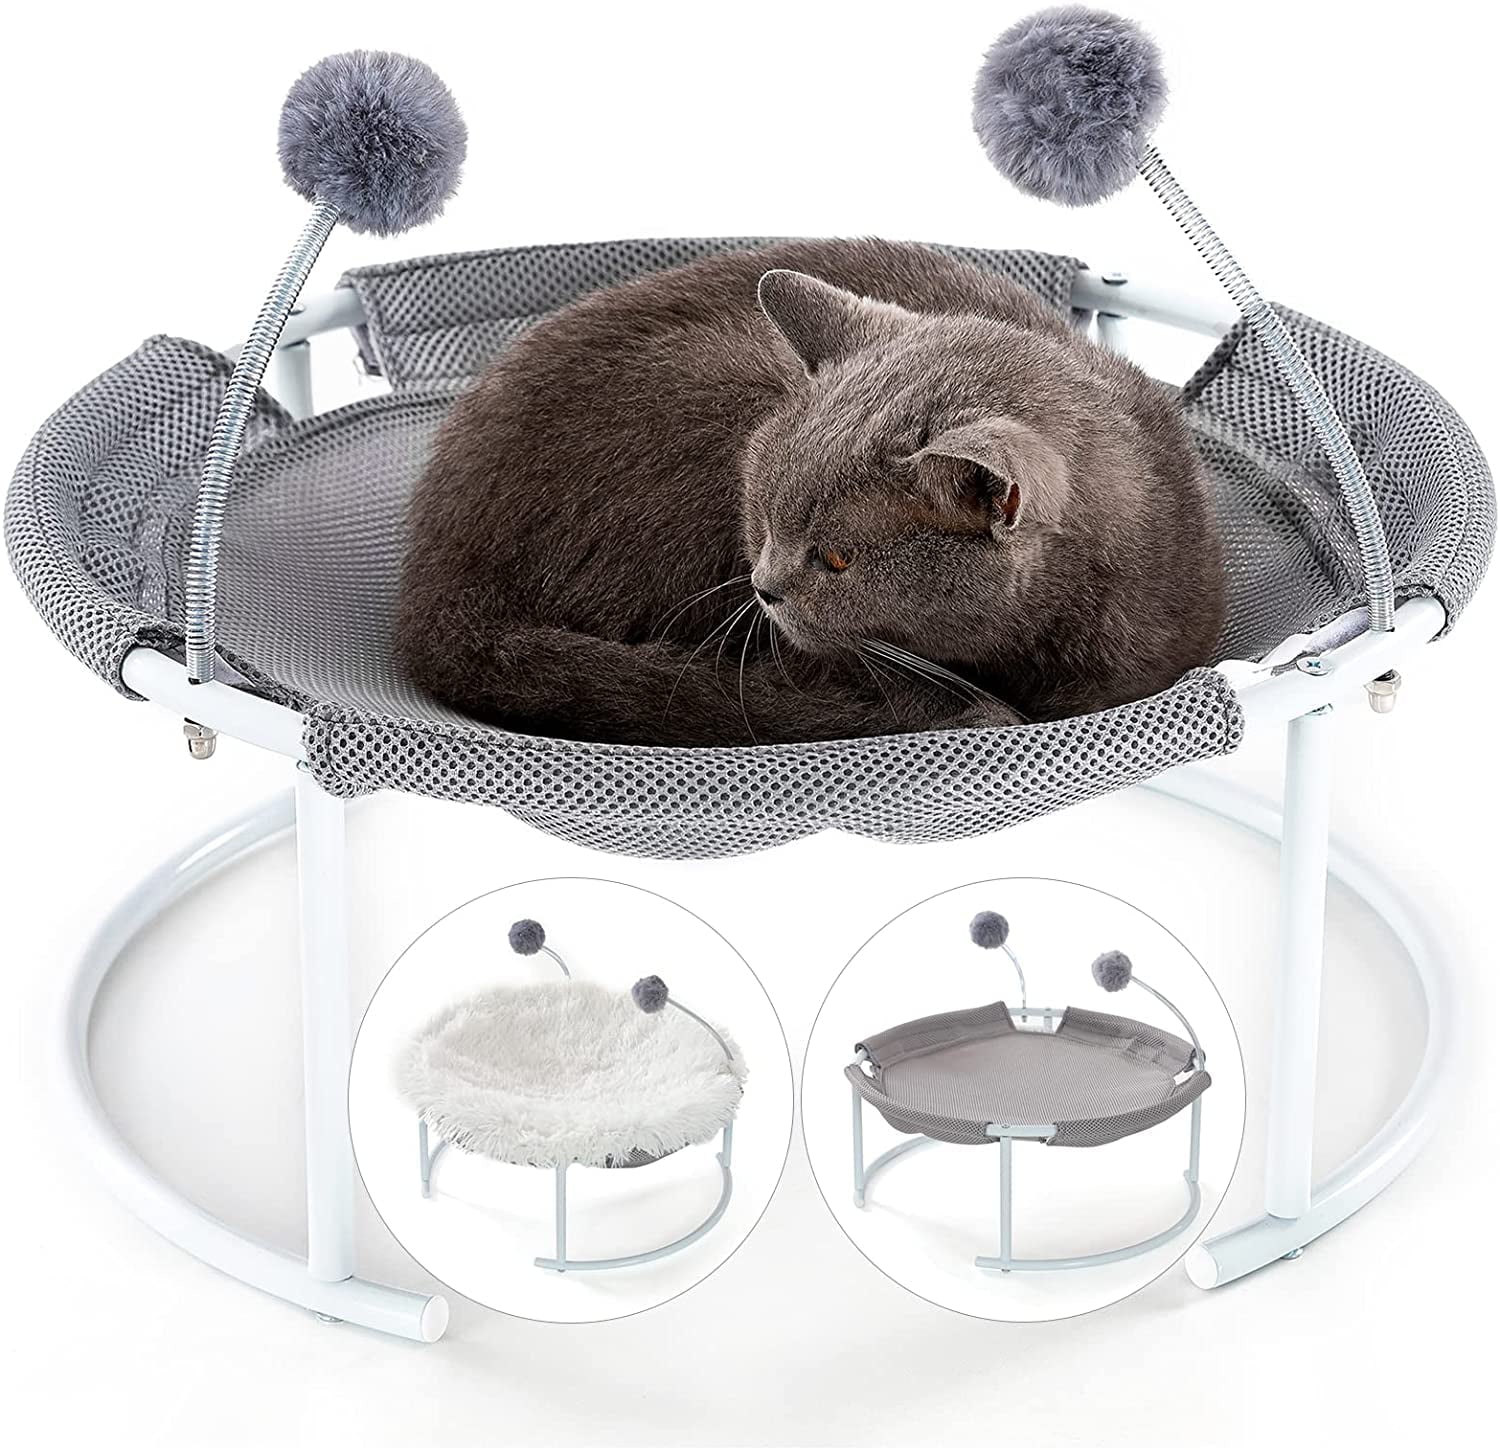 Cat Bed， Kenyone Elevated Pet Breathable Washable Hammock Bed for Cat Small Medium Dog with Plush Mat and Cat Toy Stuff Fur Ball Pet Supply for Kitty and Puppy Indoors and Outdoors (Gray)